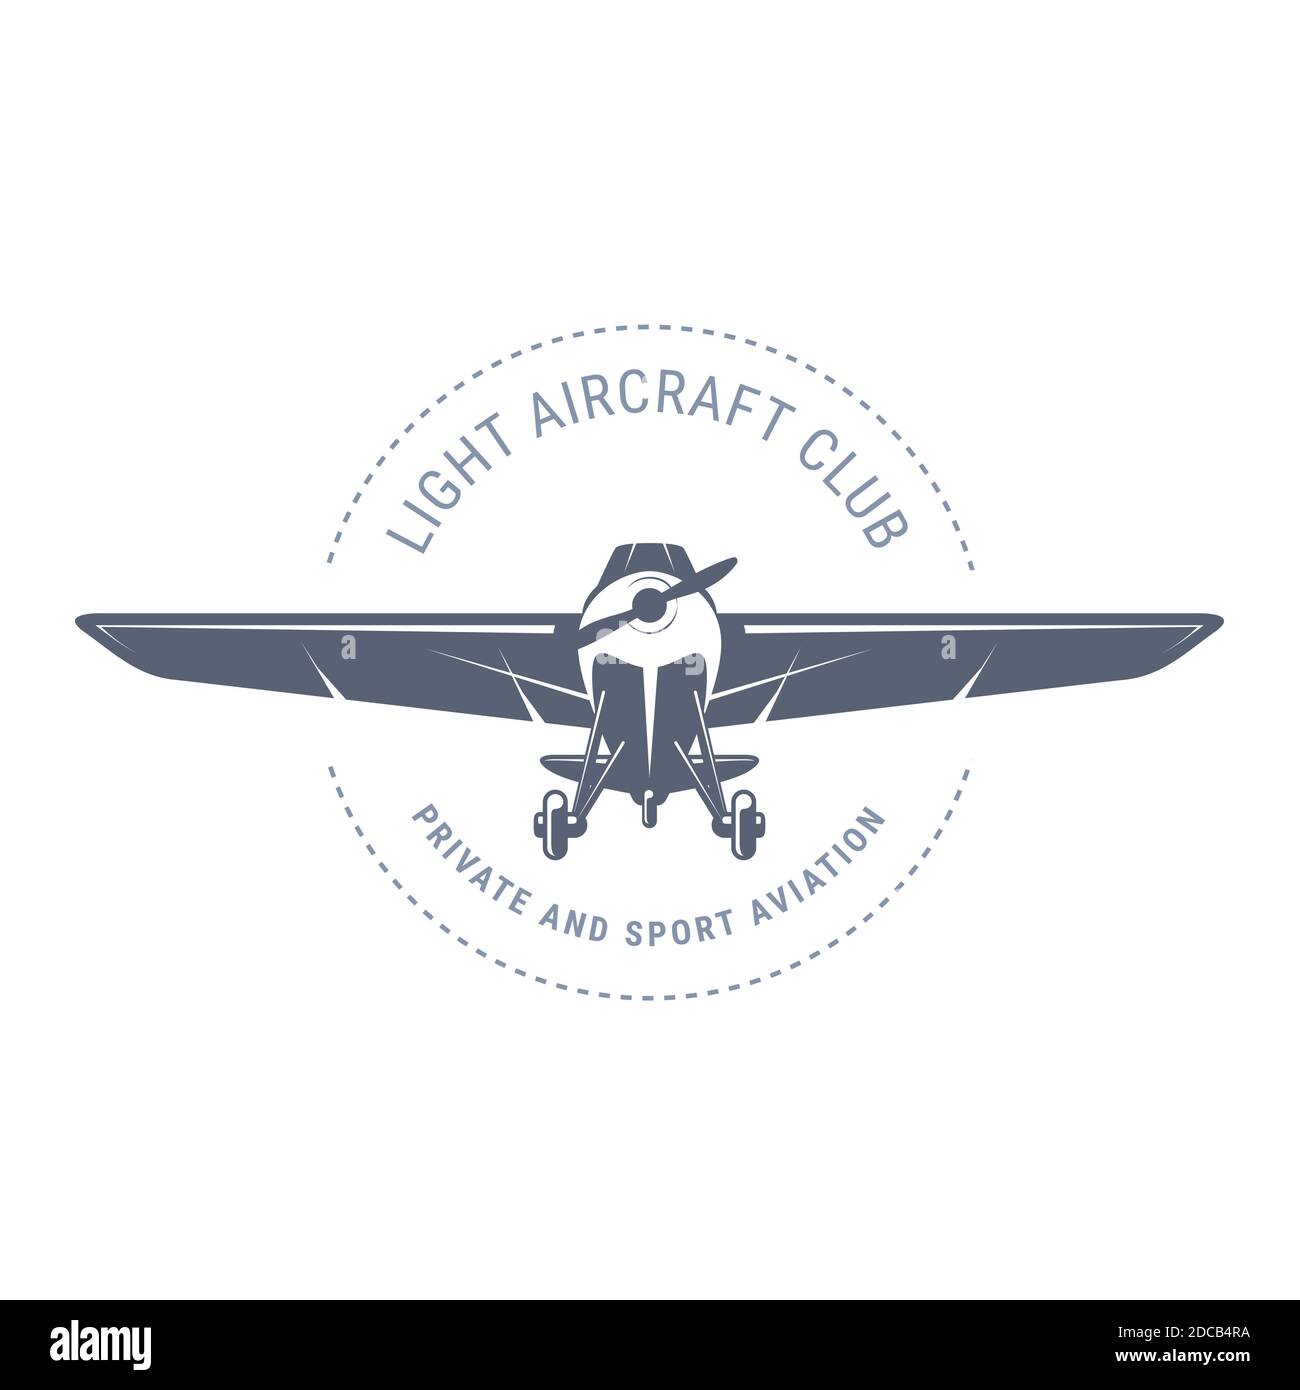 Light aviation emblem with biplane , vintage airplane icon,  propeller aircraft front view logo, vector illustration Stock Vector